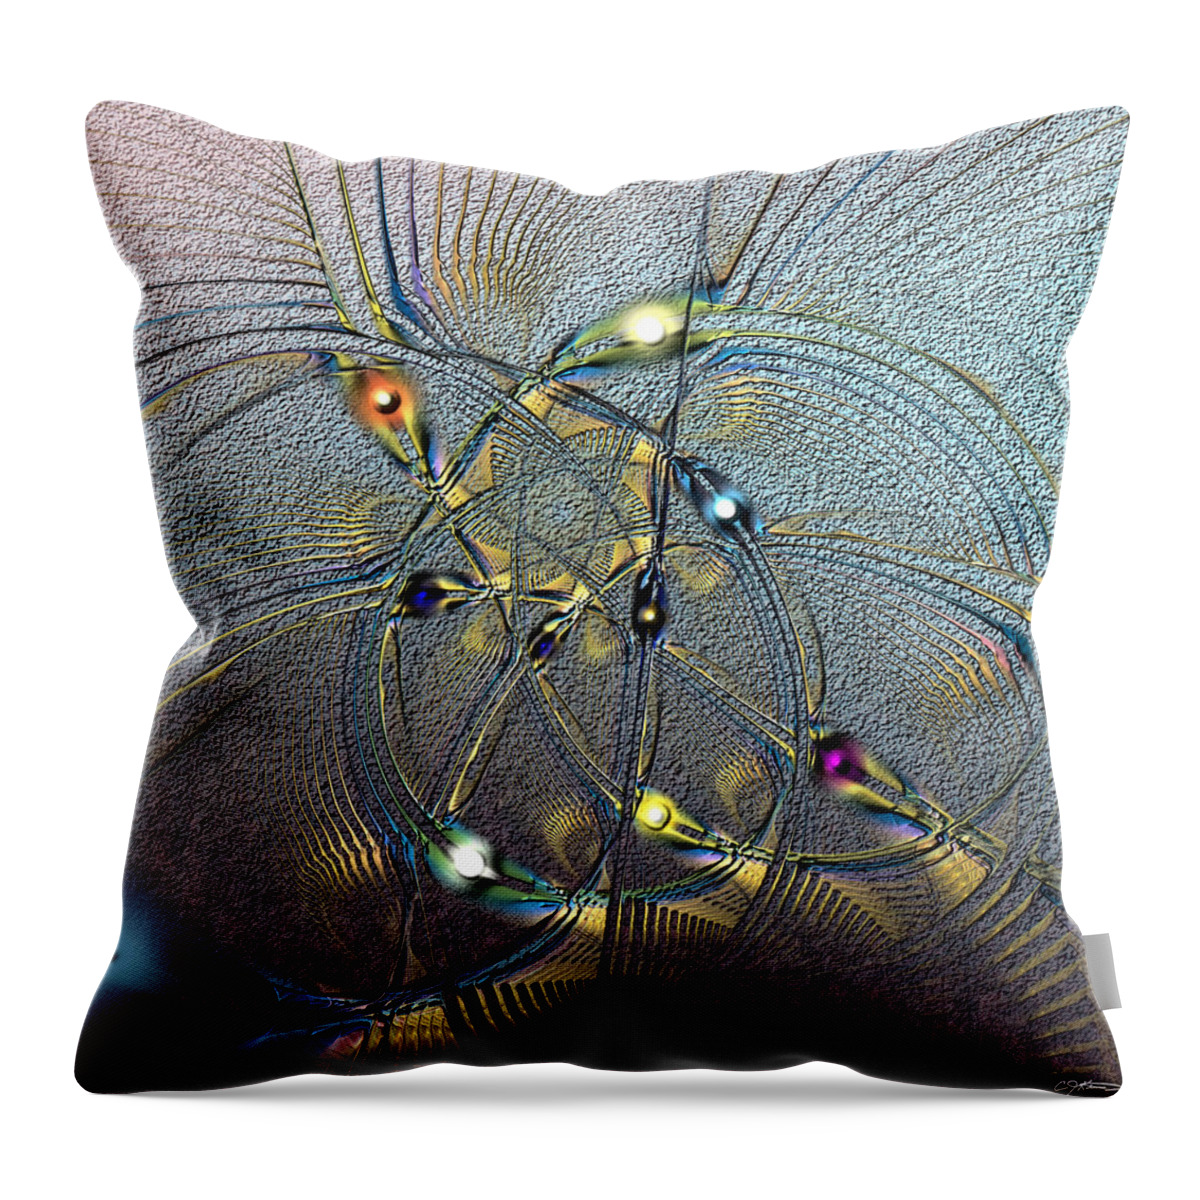 Abstract Throw Pillow featuring the digital art Inviolate Relativism by Casey Kotas